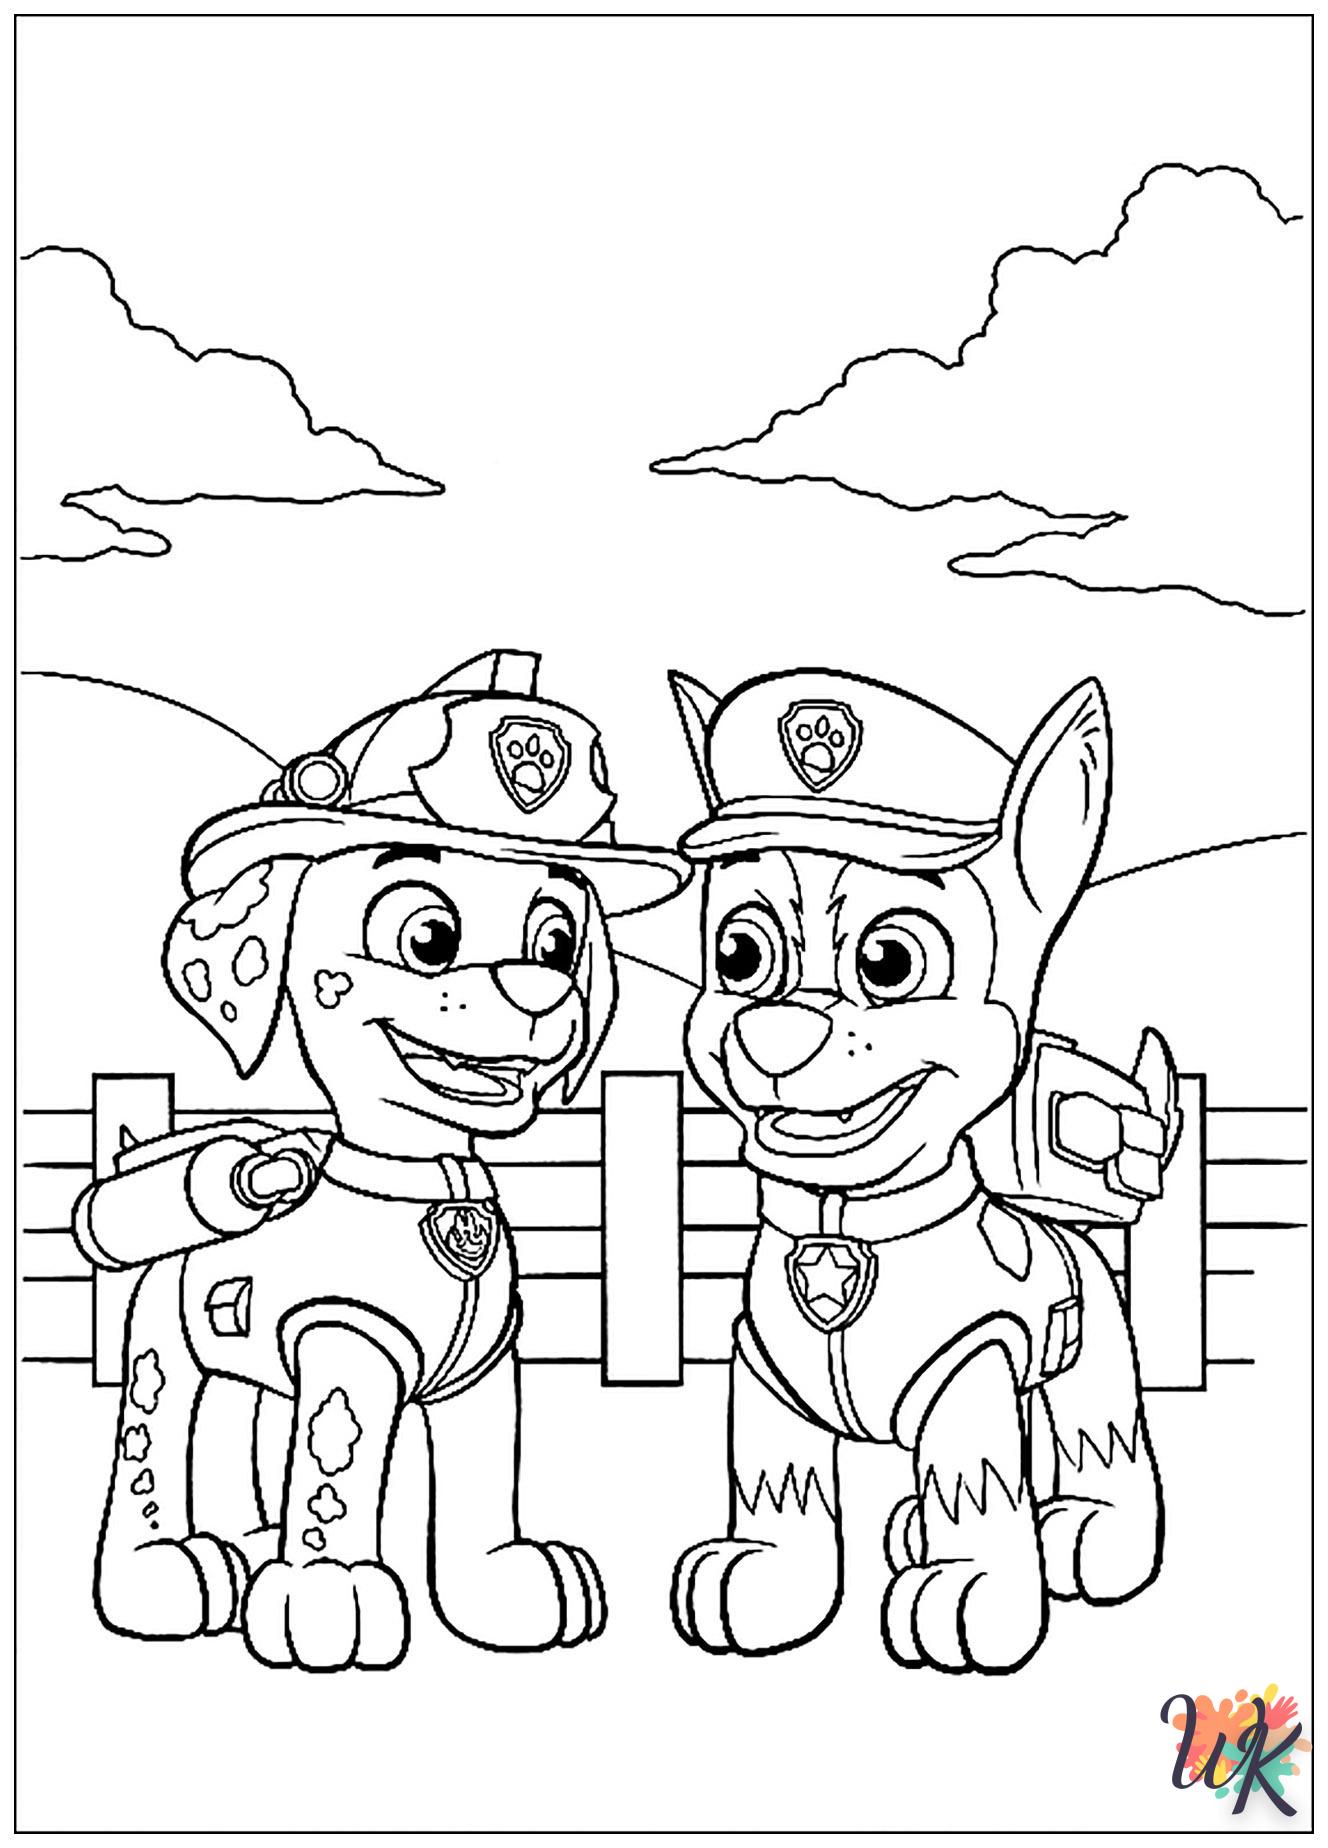 Paw Patrol coloring pages easy